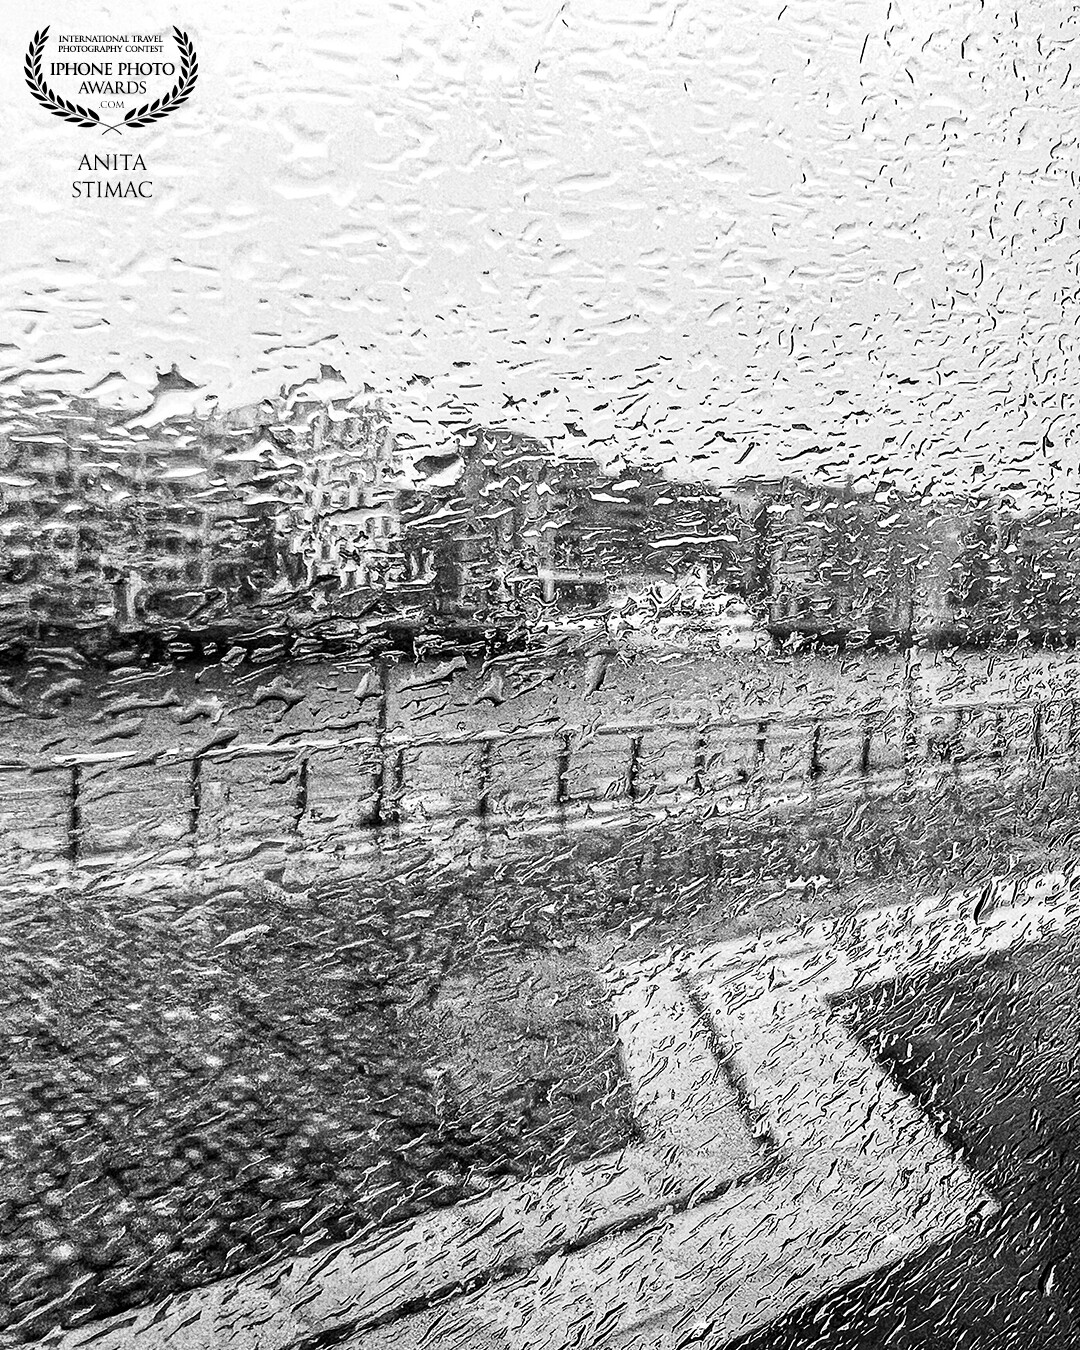 Looking out the window of a bus in Dublin, the rain painted a unique portrait of the city.